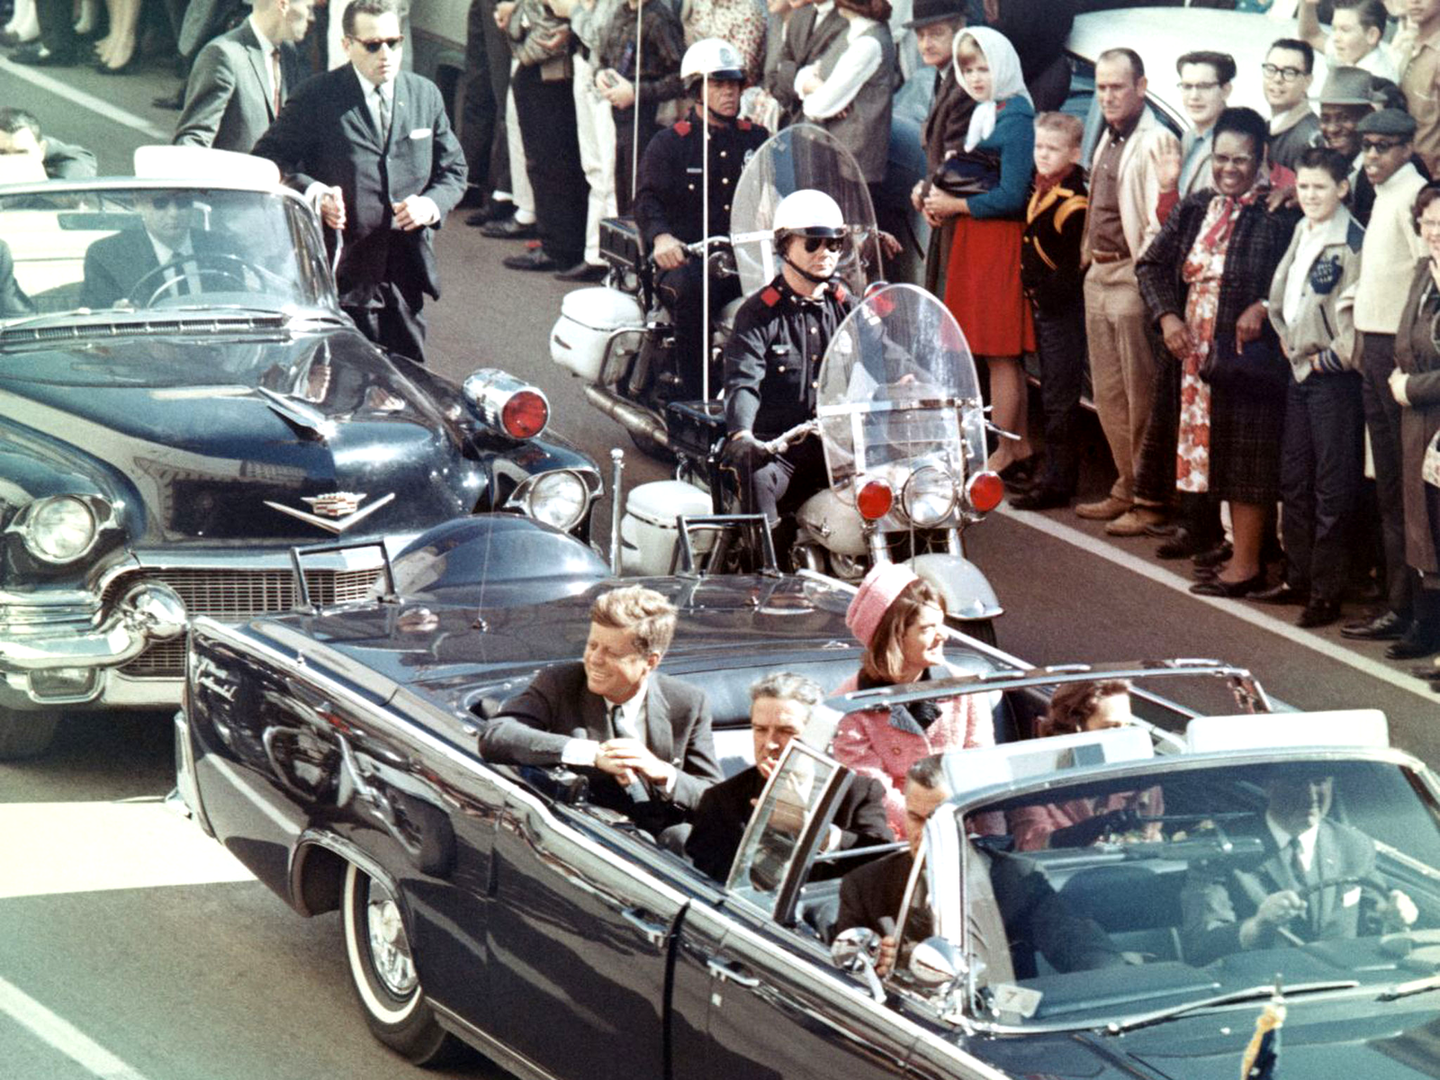 Picture of President Kennedy in the limousine in Dallas, Texas, on Main Street, minutes before the assassination. Also in the presidential limousine are Jackie Kennedy, Texas Governor John Connally, and his wife, Nellie.